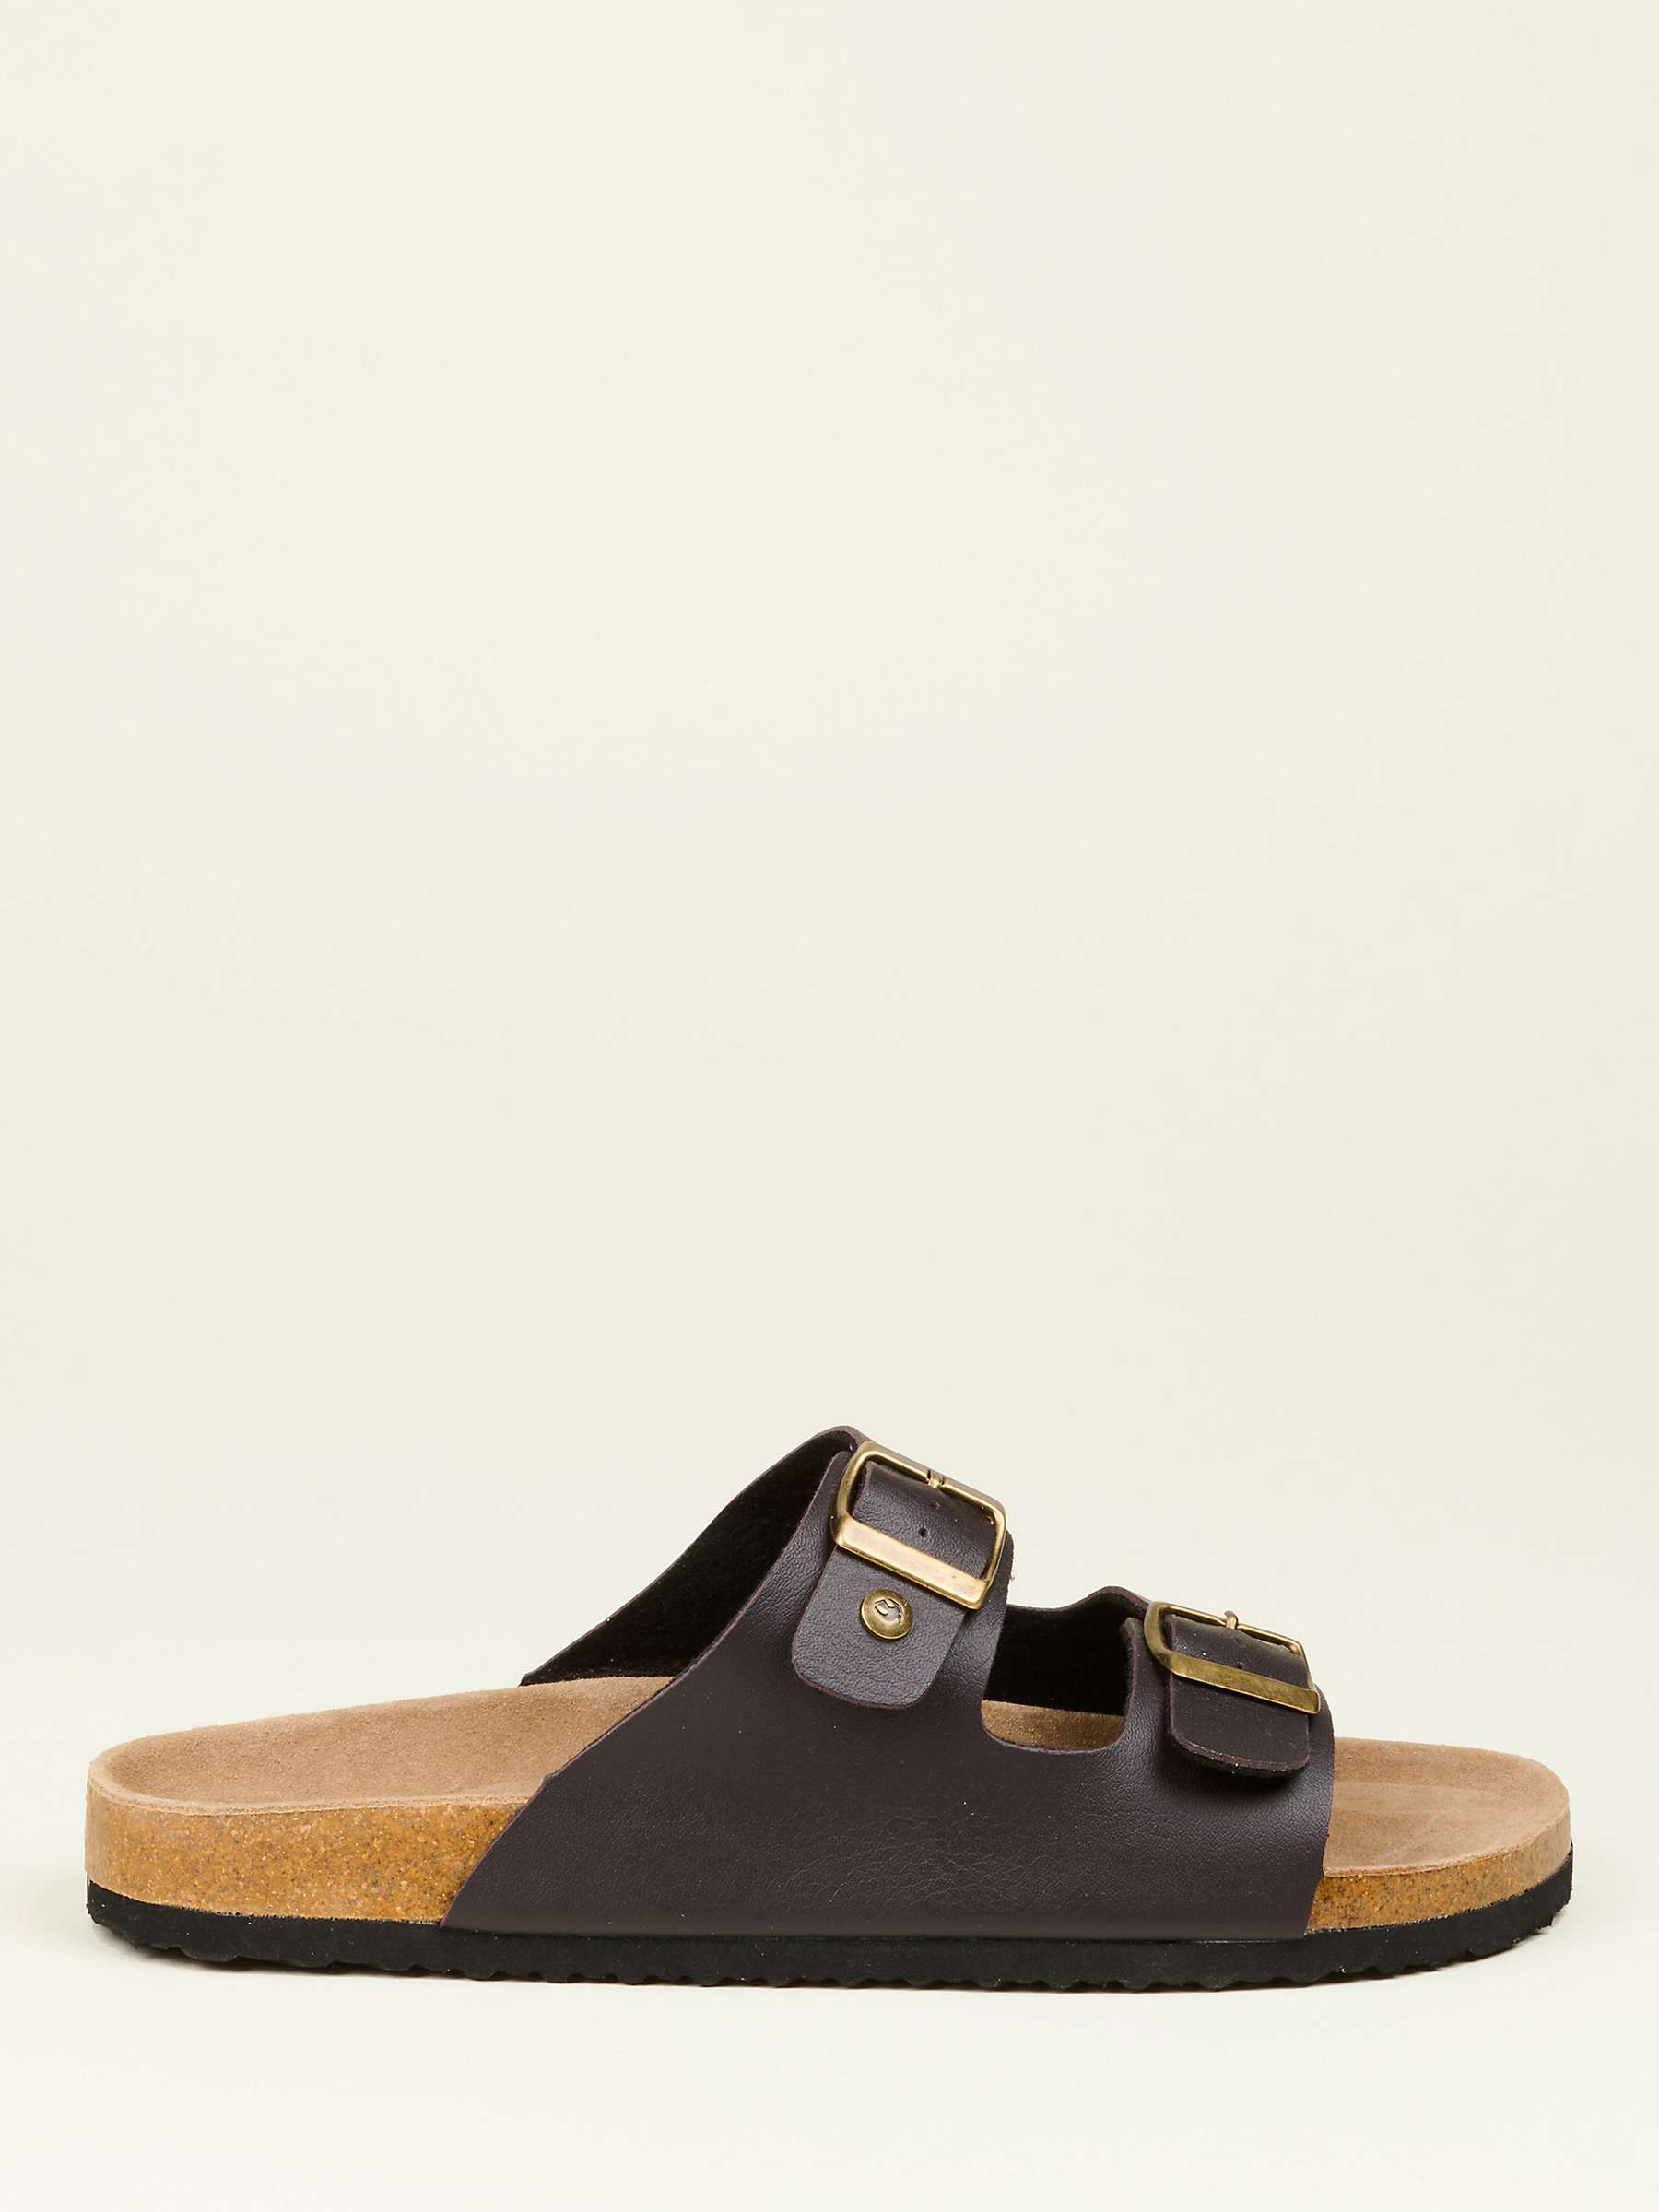 Buy Brakeburn Classic Two Strap Sandals, Brown Online at johnlewis.com